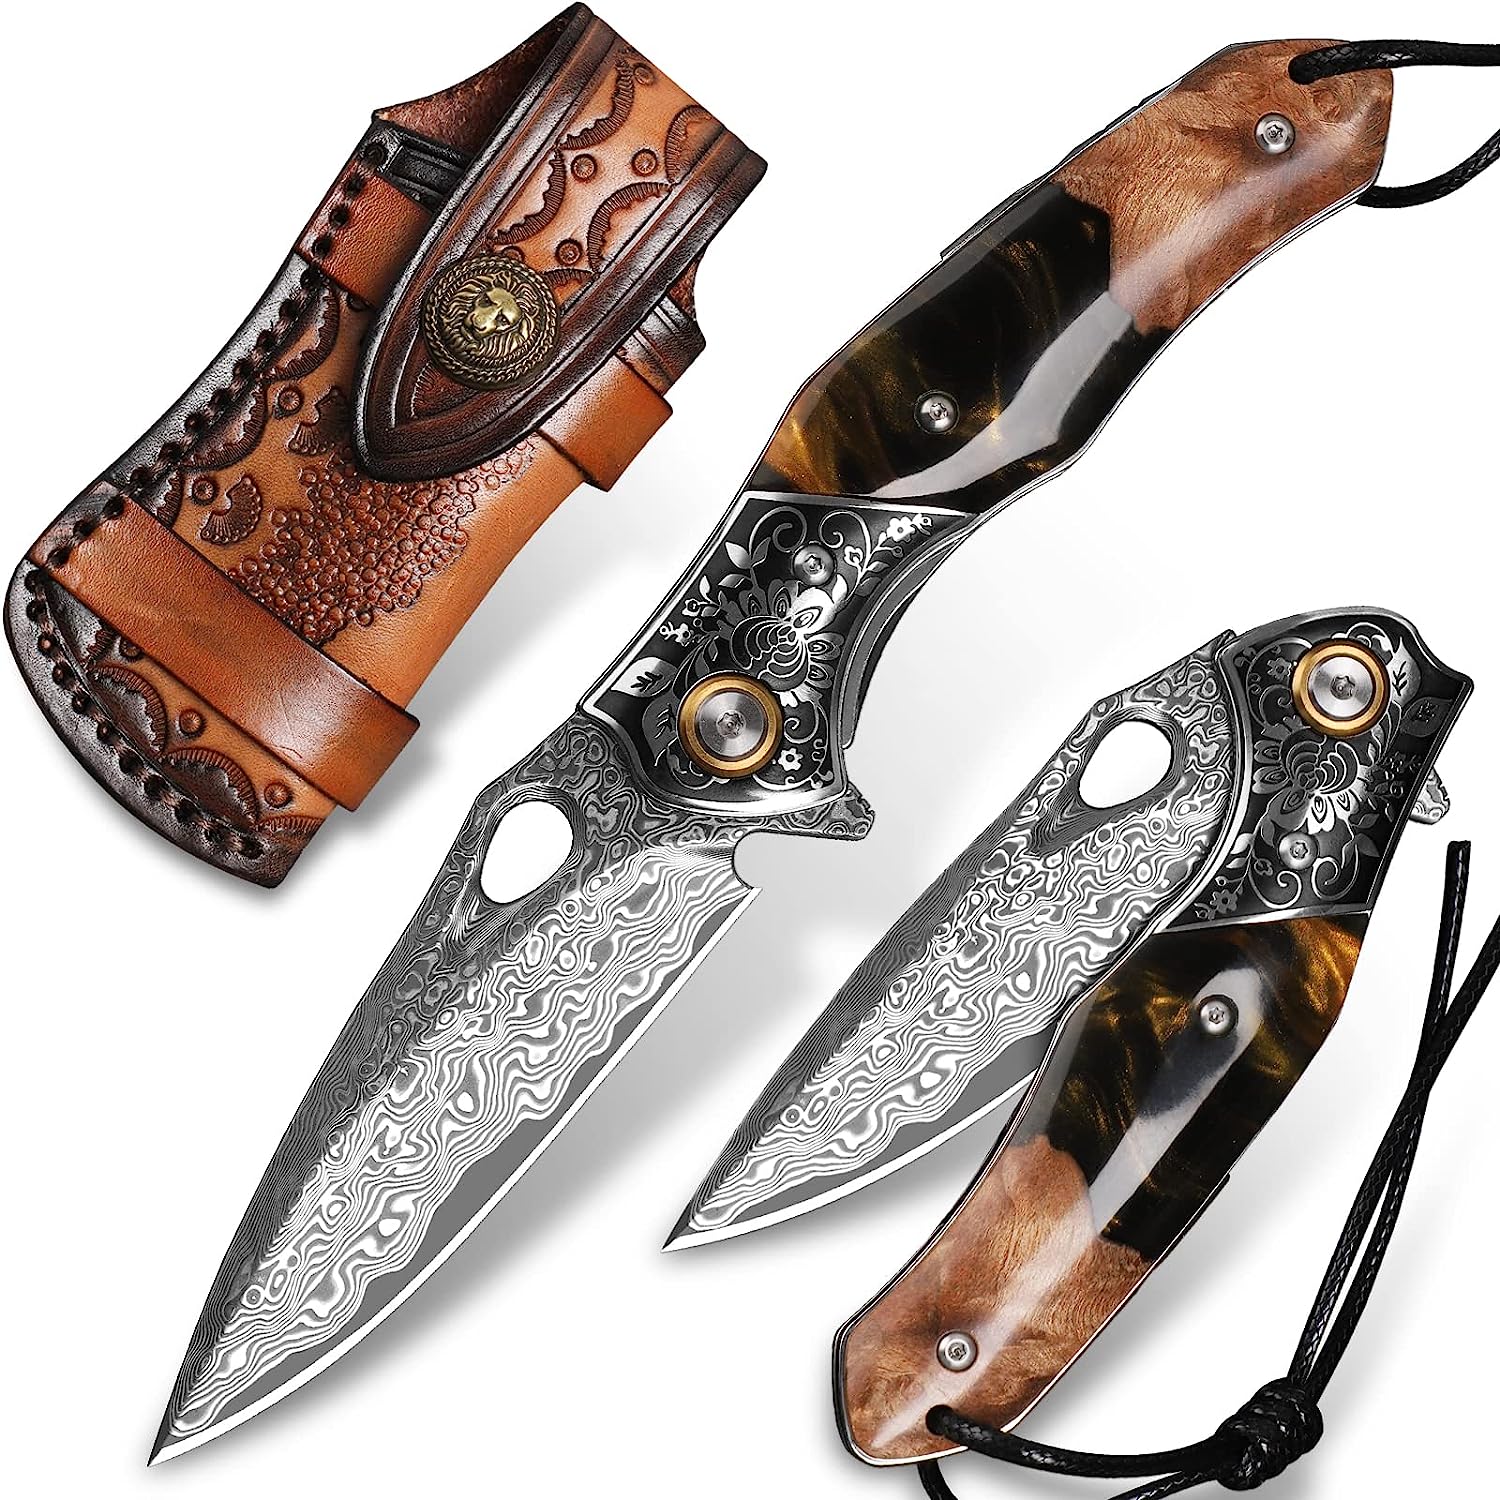 Minowe handmade Japan Damascus steel pocket knife，3.1" VG10 blade men and women Folding knife，With holster，Lining lock，resin and Maple handle，Suitable for EDC outdoor camping，go fishing hunting